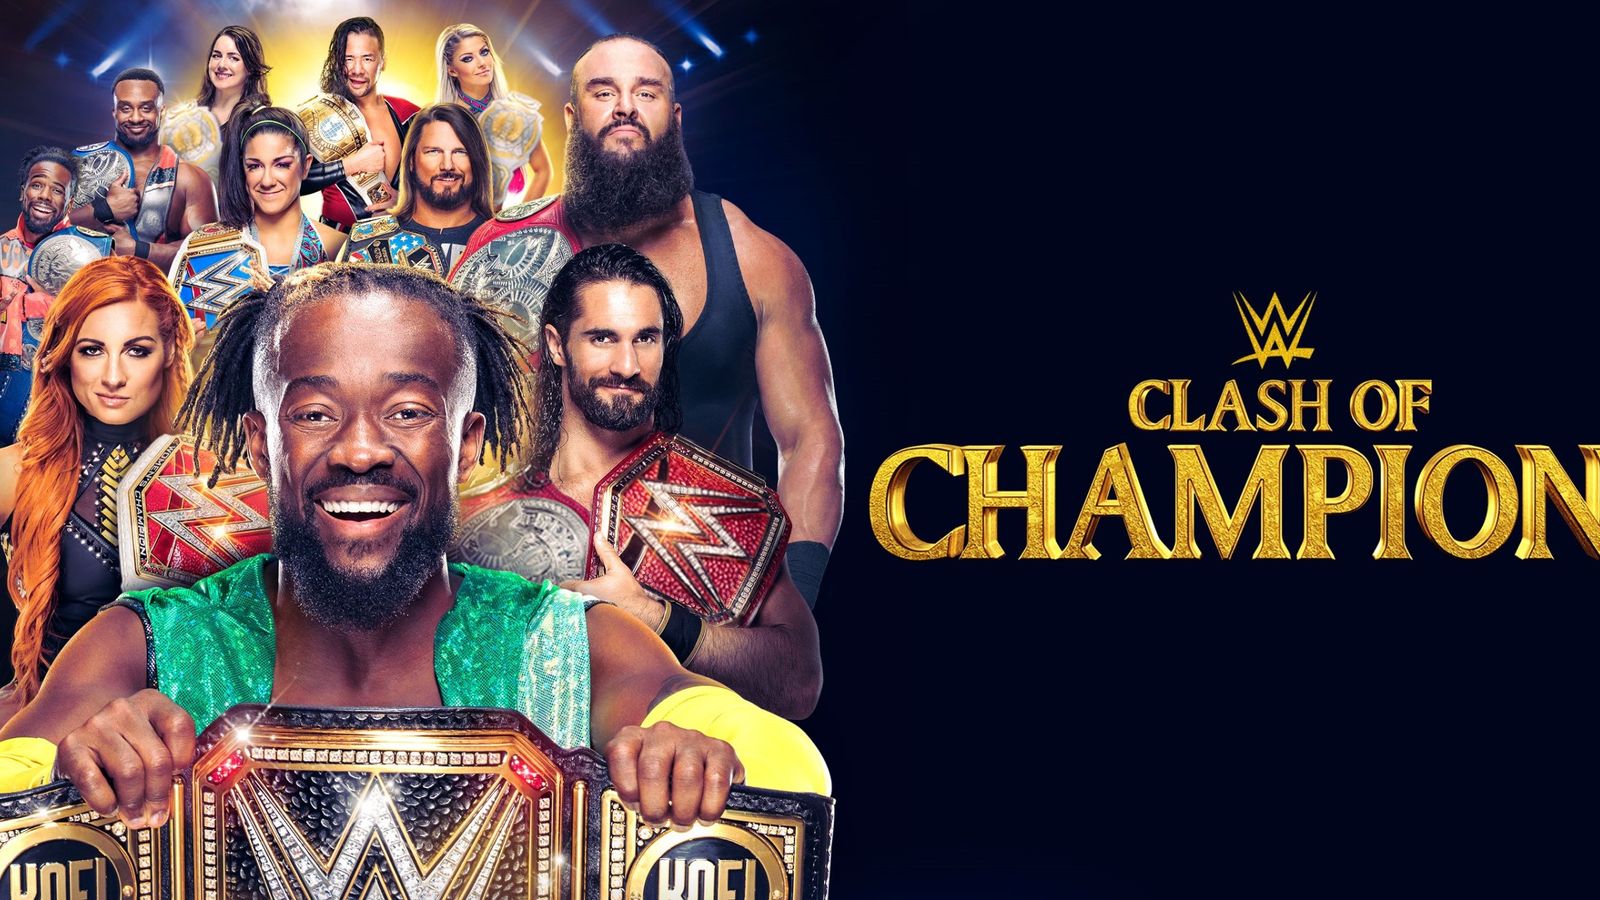 How to book WWE Clash of Champions Everything you need to see Sunday's